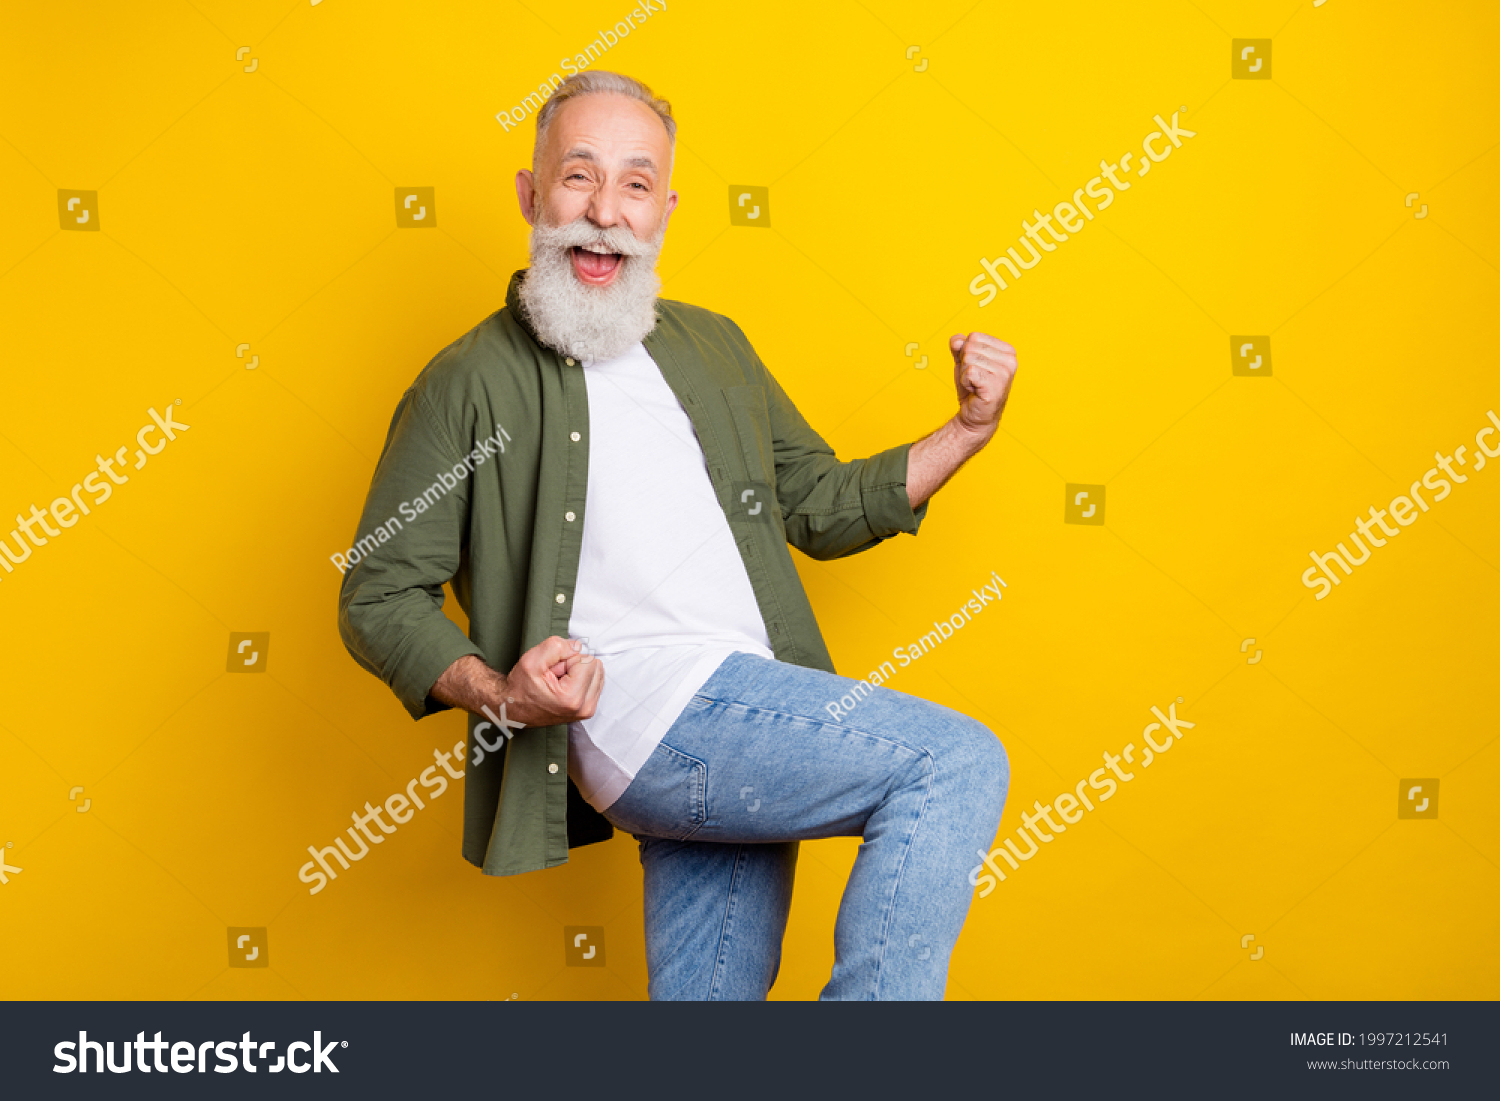 Photo portrait of grandfather smiling happy gesturing like winner isolated vivid yellow color background with copyspace #1997212541